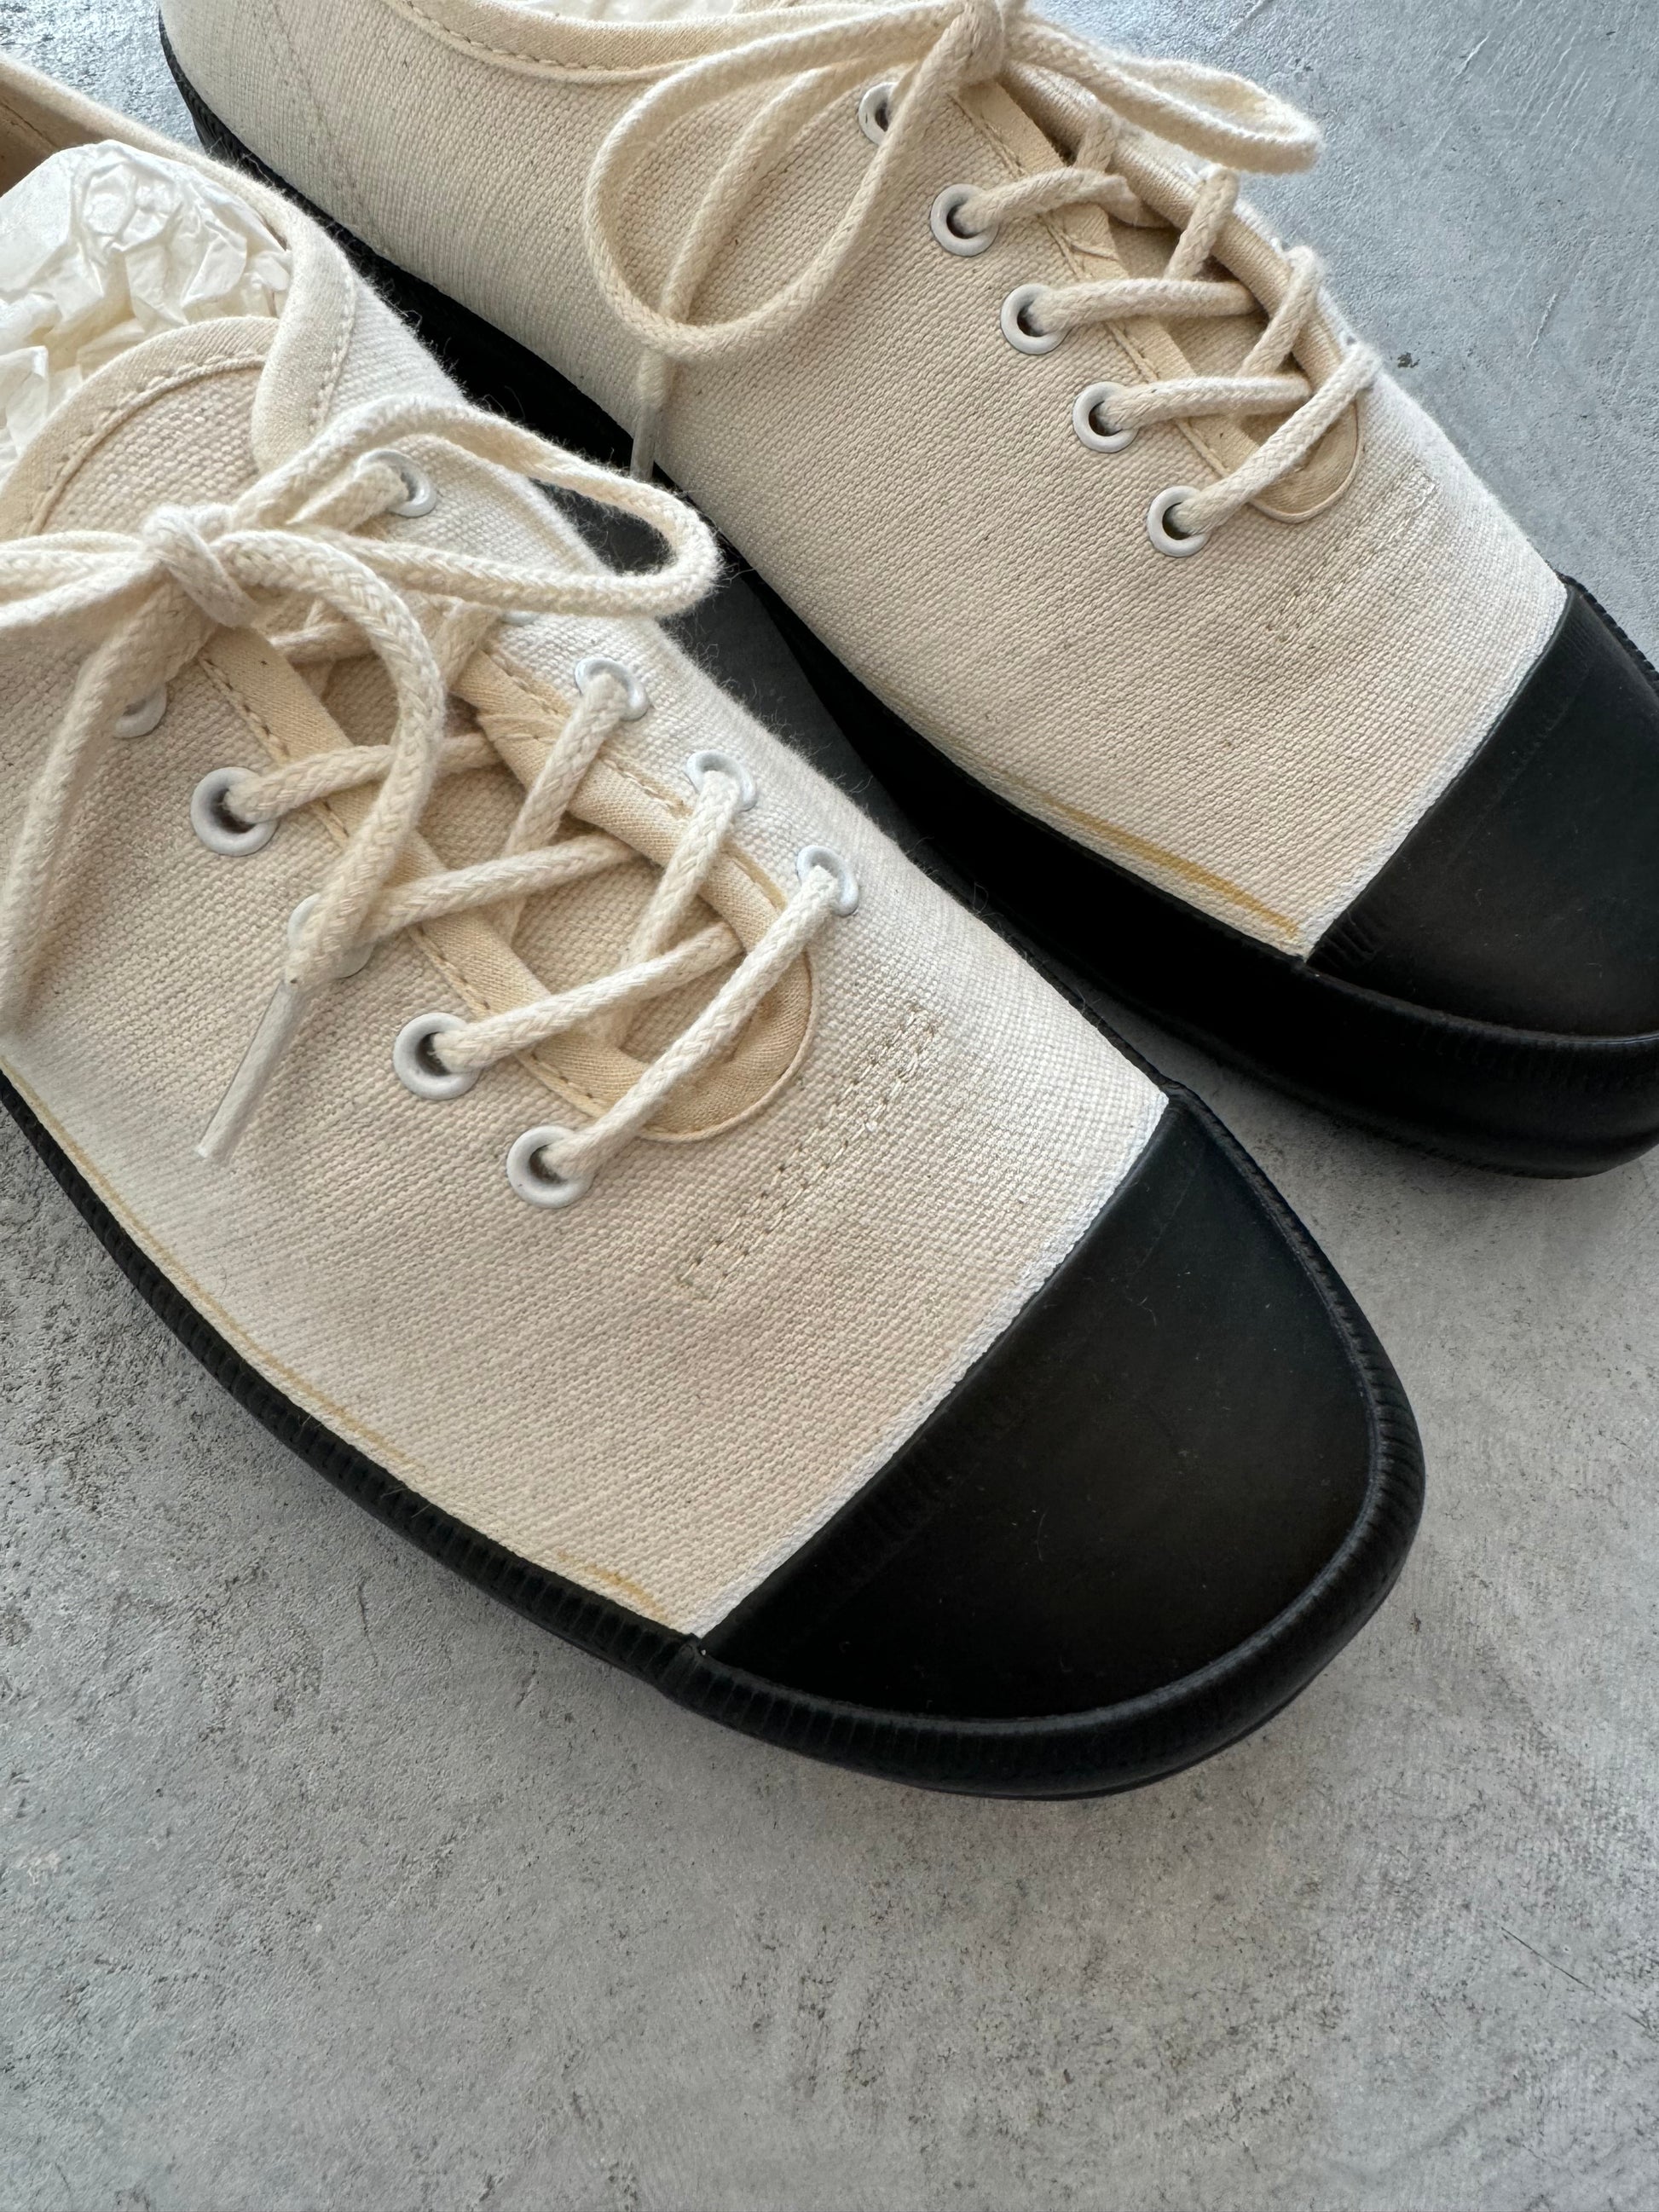 HOLECUT SNEAKERS　Marbot スニーカー　通販